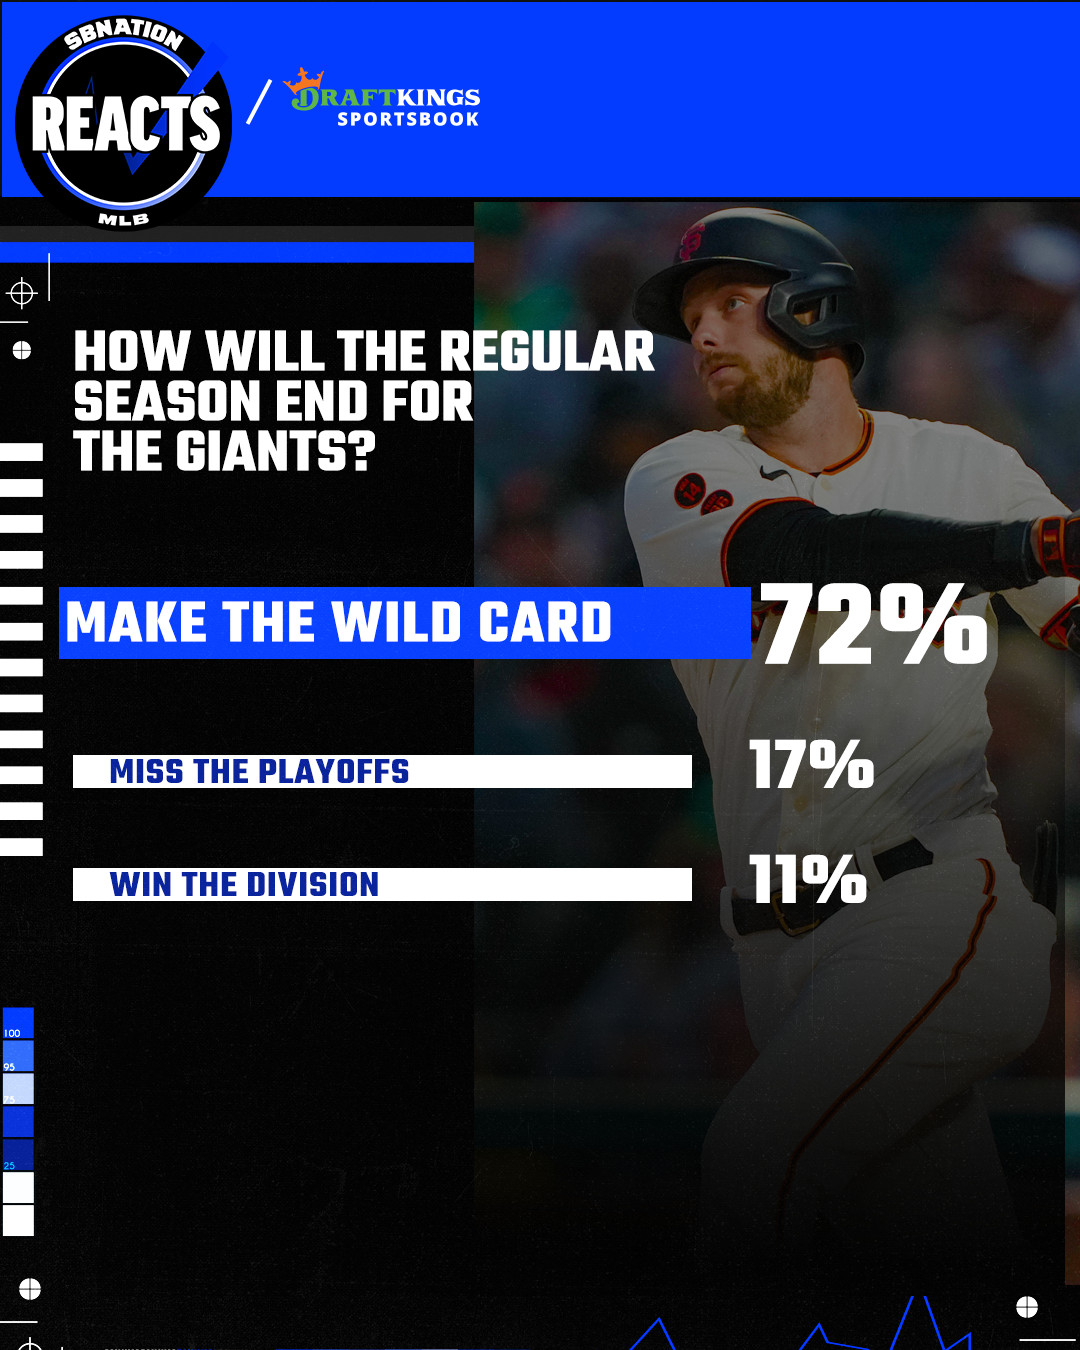 A graphic with Austin Slater, asking the question “How will the regular season end for the Giants” with a 72% bar for “Make the Wild Card,” a 17% bar for “Miss the playoffs” and an 11% bar for “Win the division”